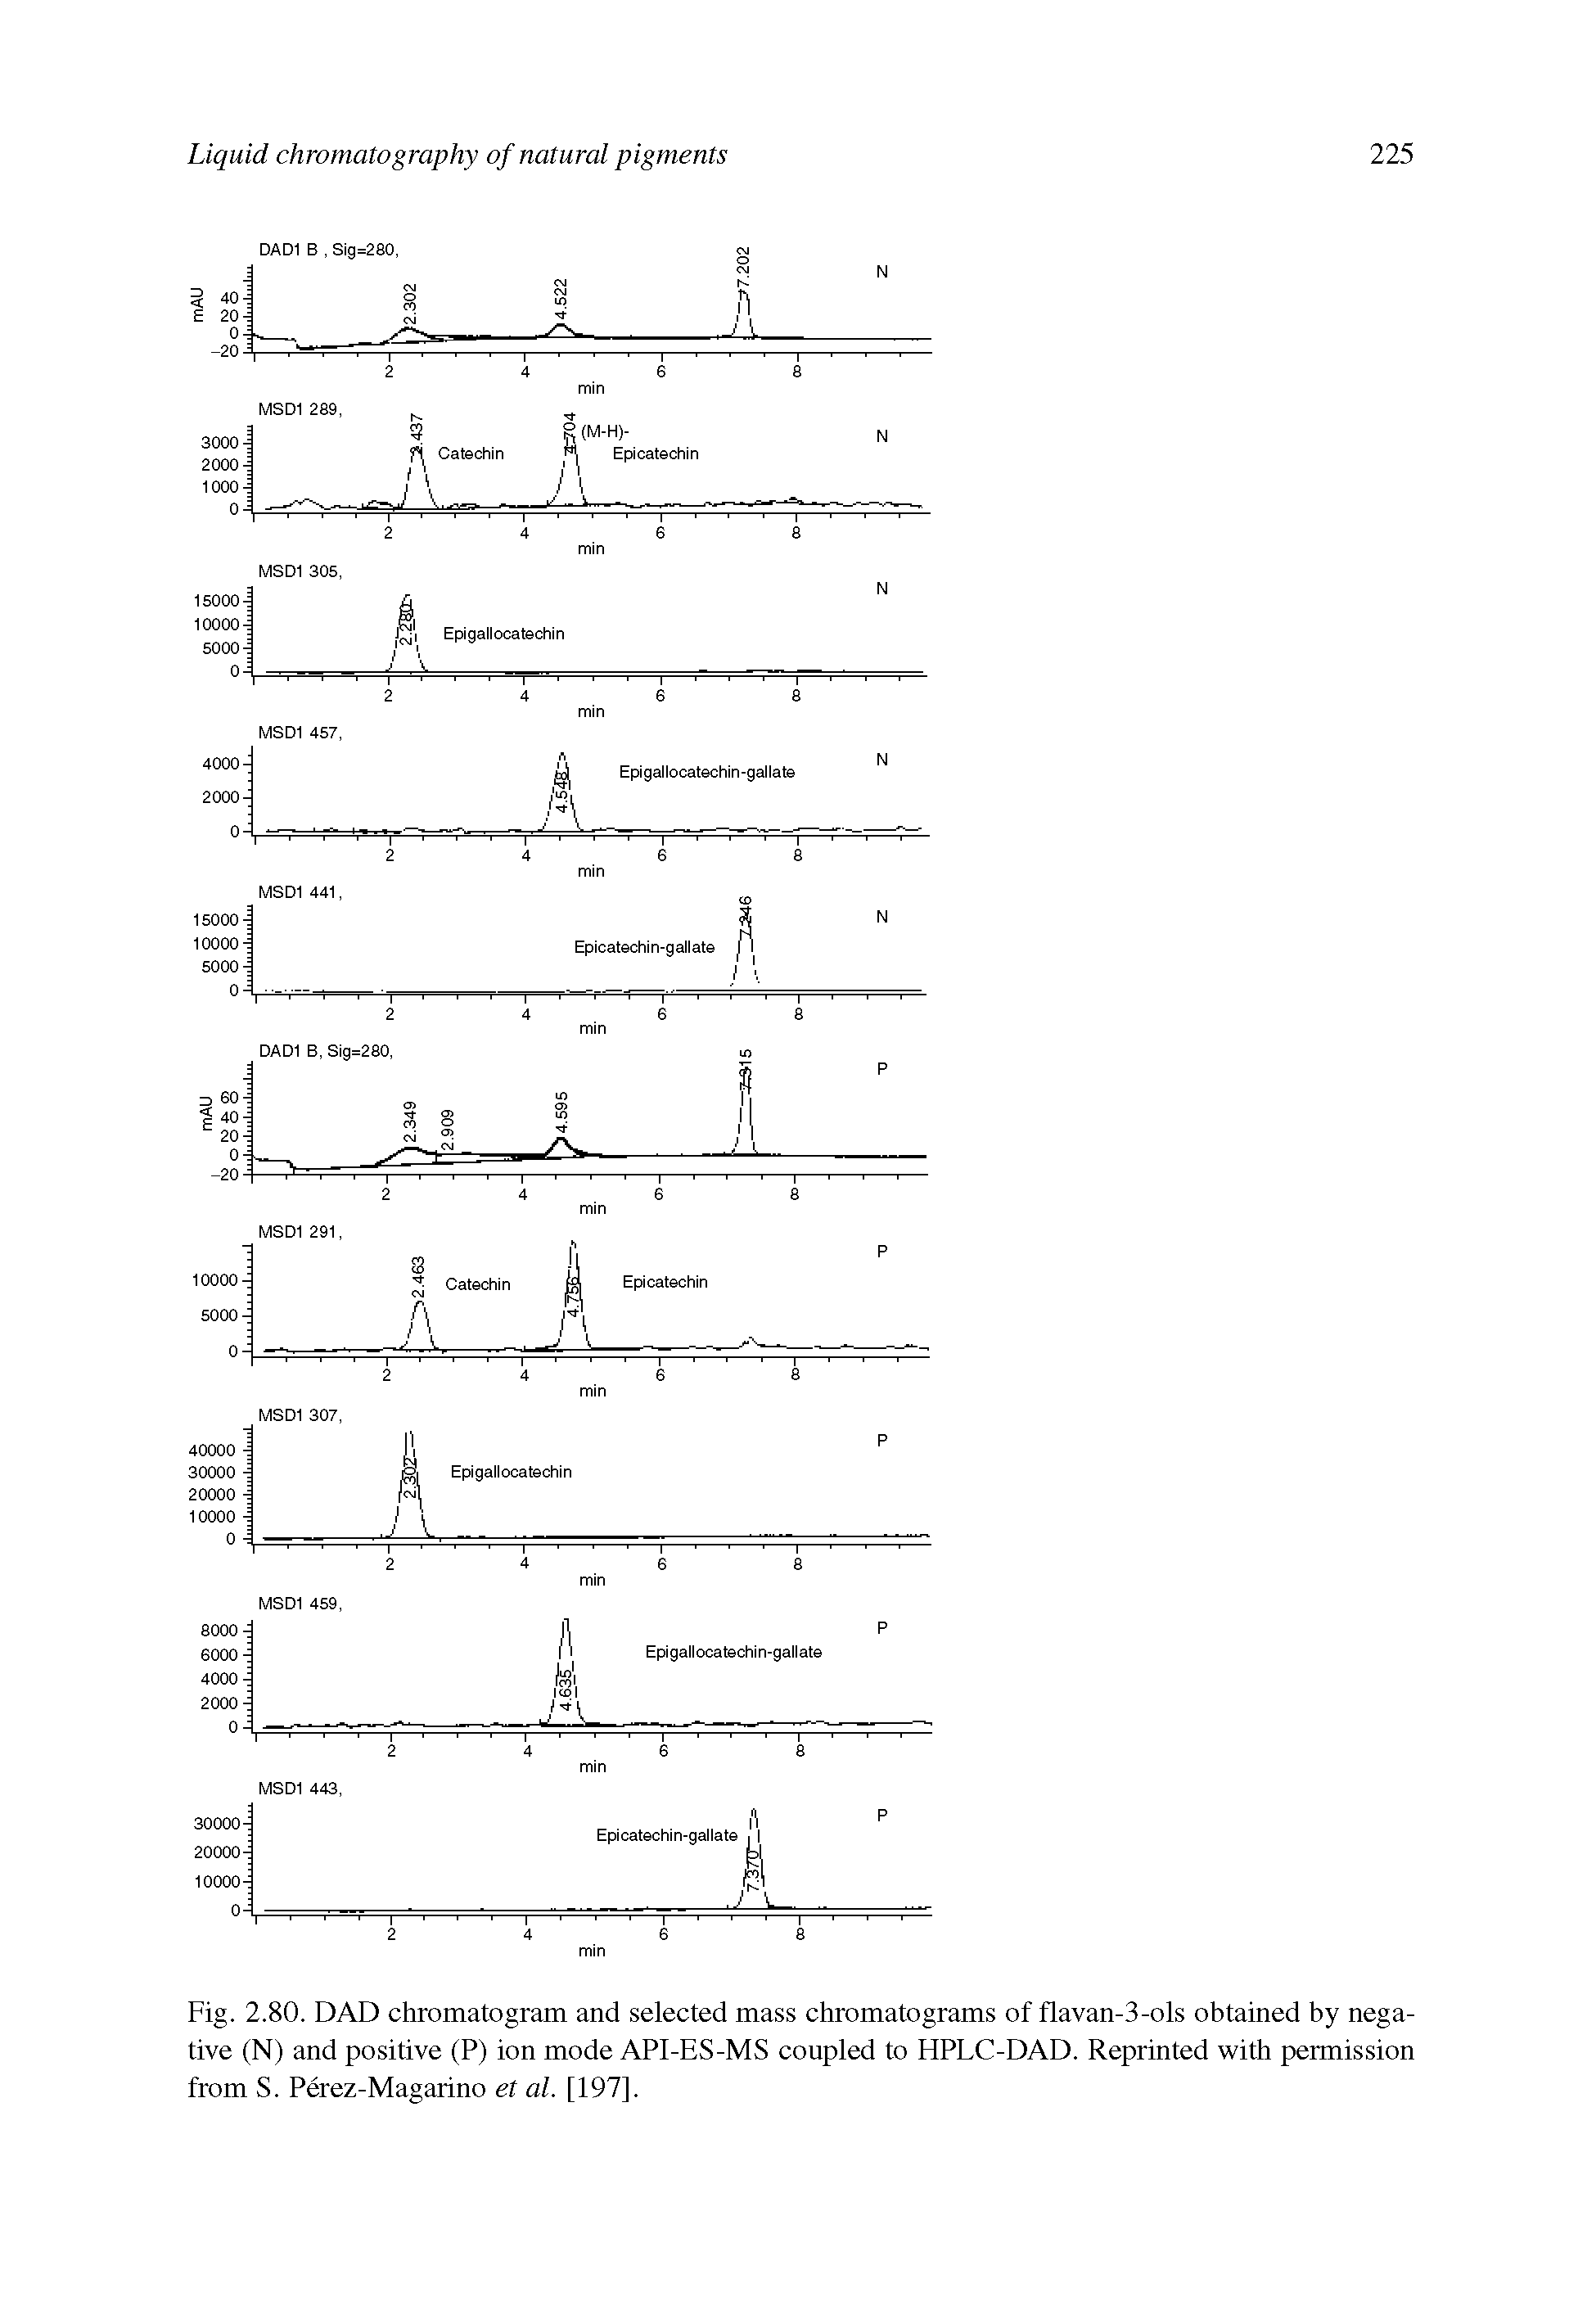 Fig. 2.80. DAD chromatogram and selected mass chromatograms of flavan-3-ols obtained by negative (N) and positive (P) ion mode API-ES-MS coupled to HPLC-DAD. Reprinted with permission from S. Perez-Magarino et al. [197].